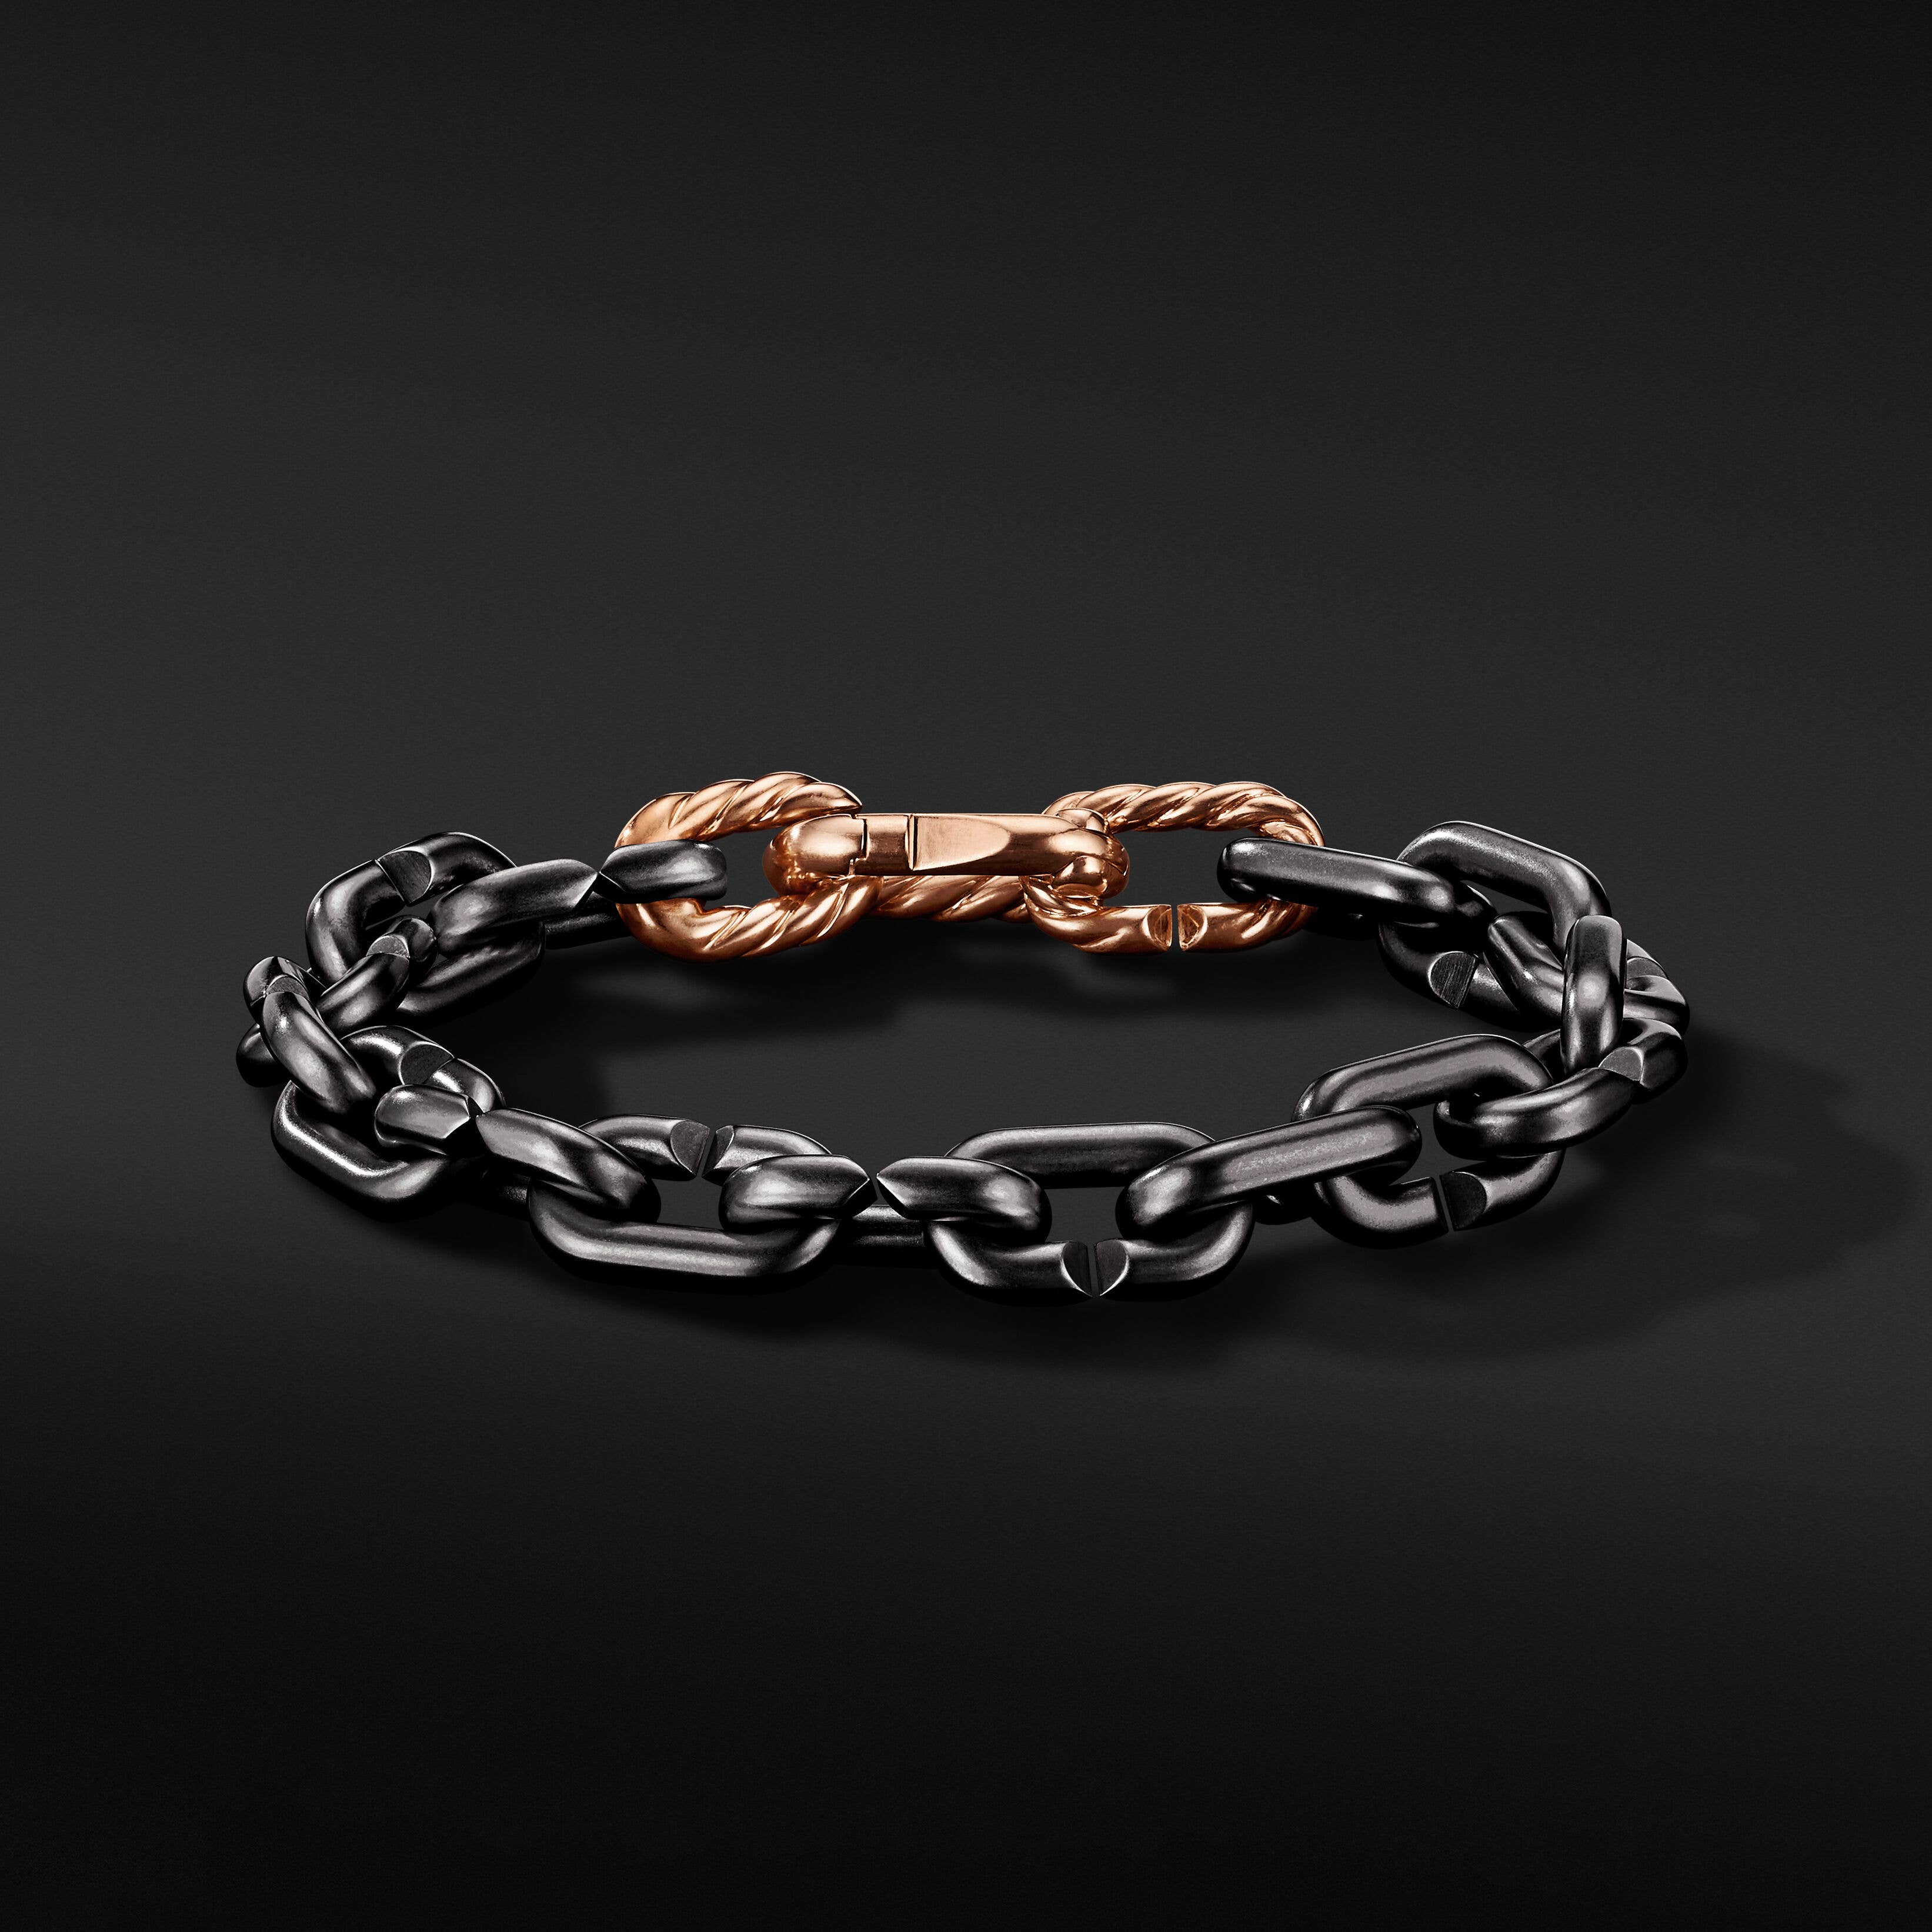 Chain Links Bracelet in Grey Titanium with 18K Rose Gold